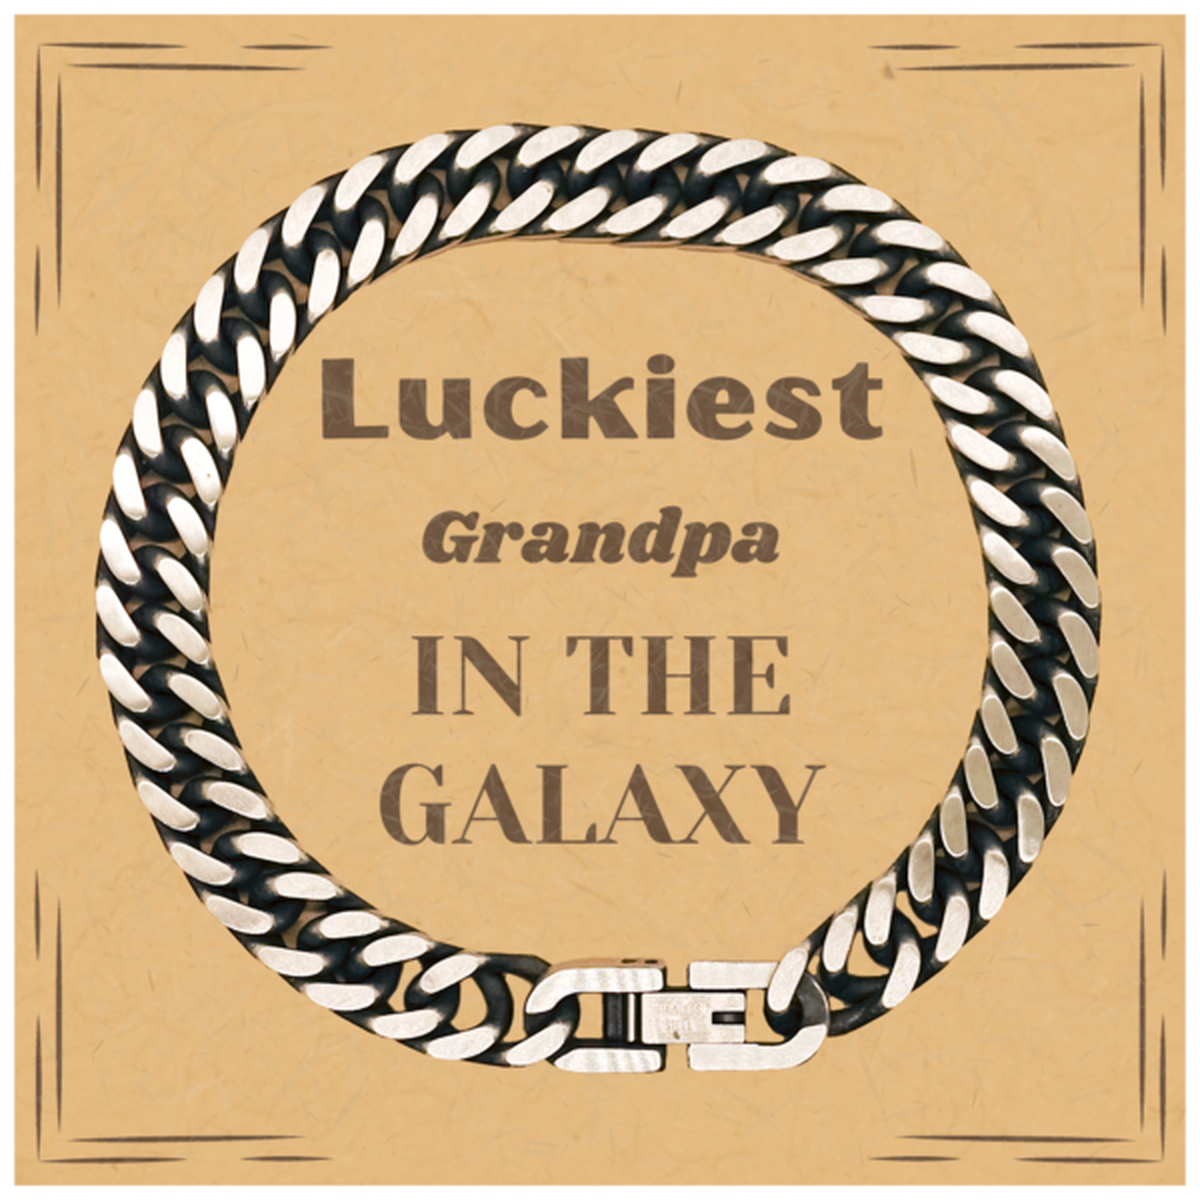 Luckiest Grandpa in the Galaxy, To My Grandpa Message Card Gifts, Christmas Grandpa Cuban Link Chain Bracelet Gifts, X-mas Birthday Unique Gifts For Grandpa Men Women